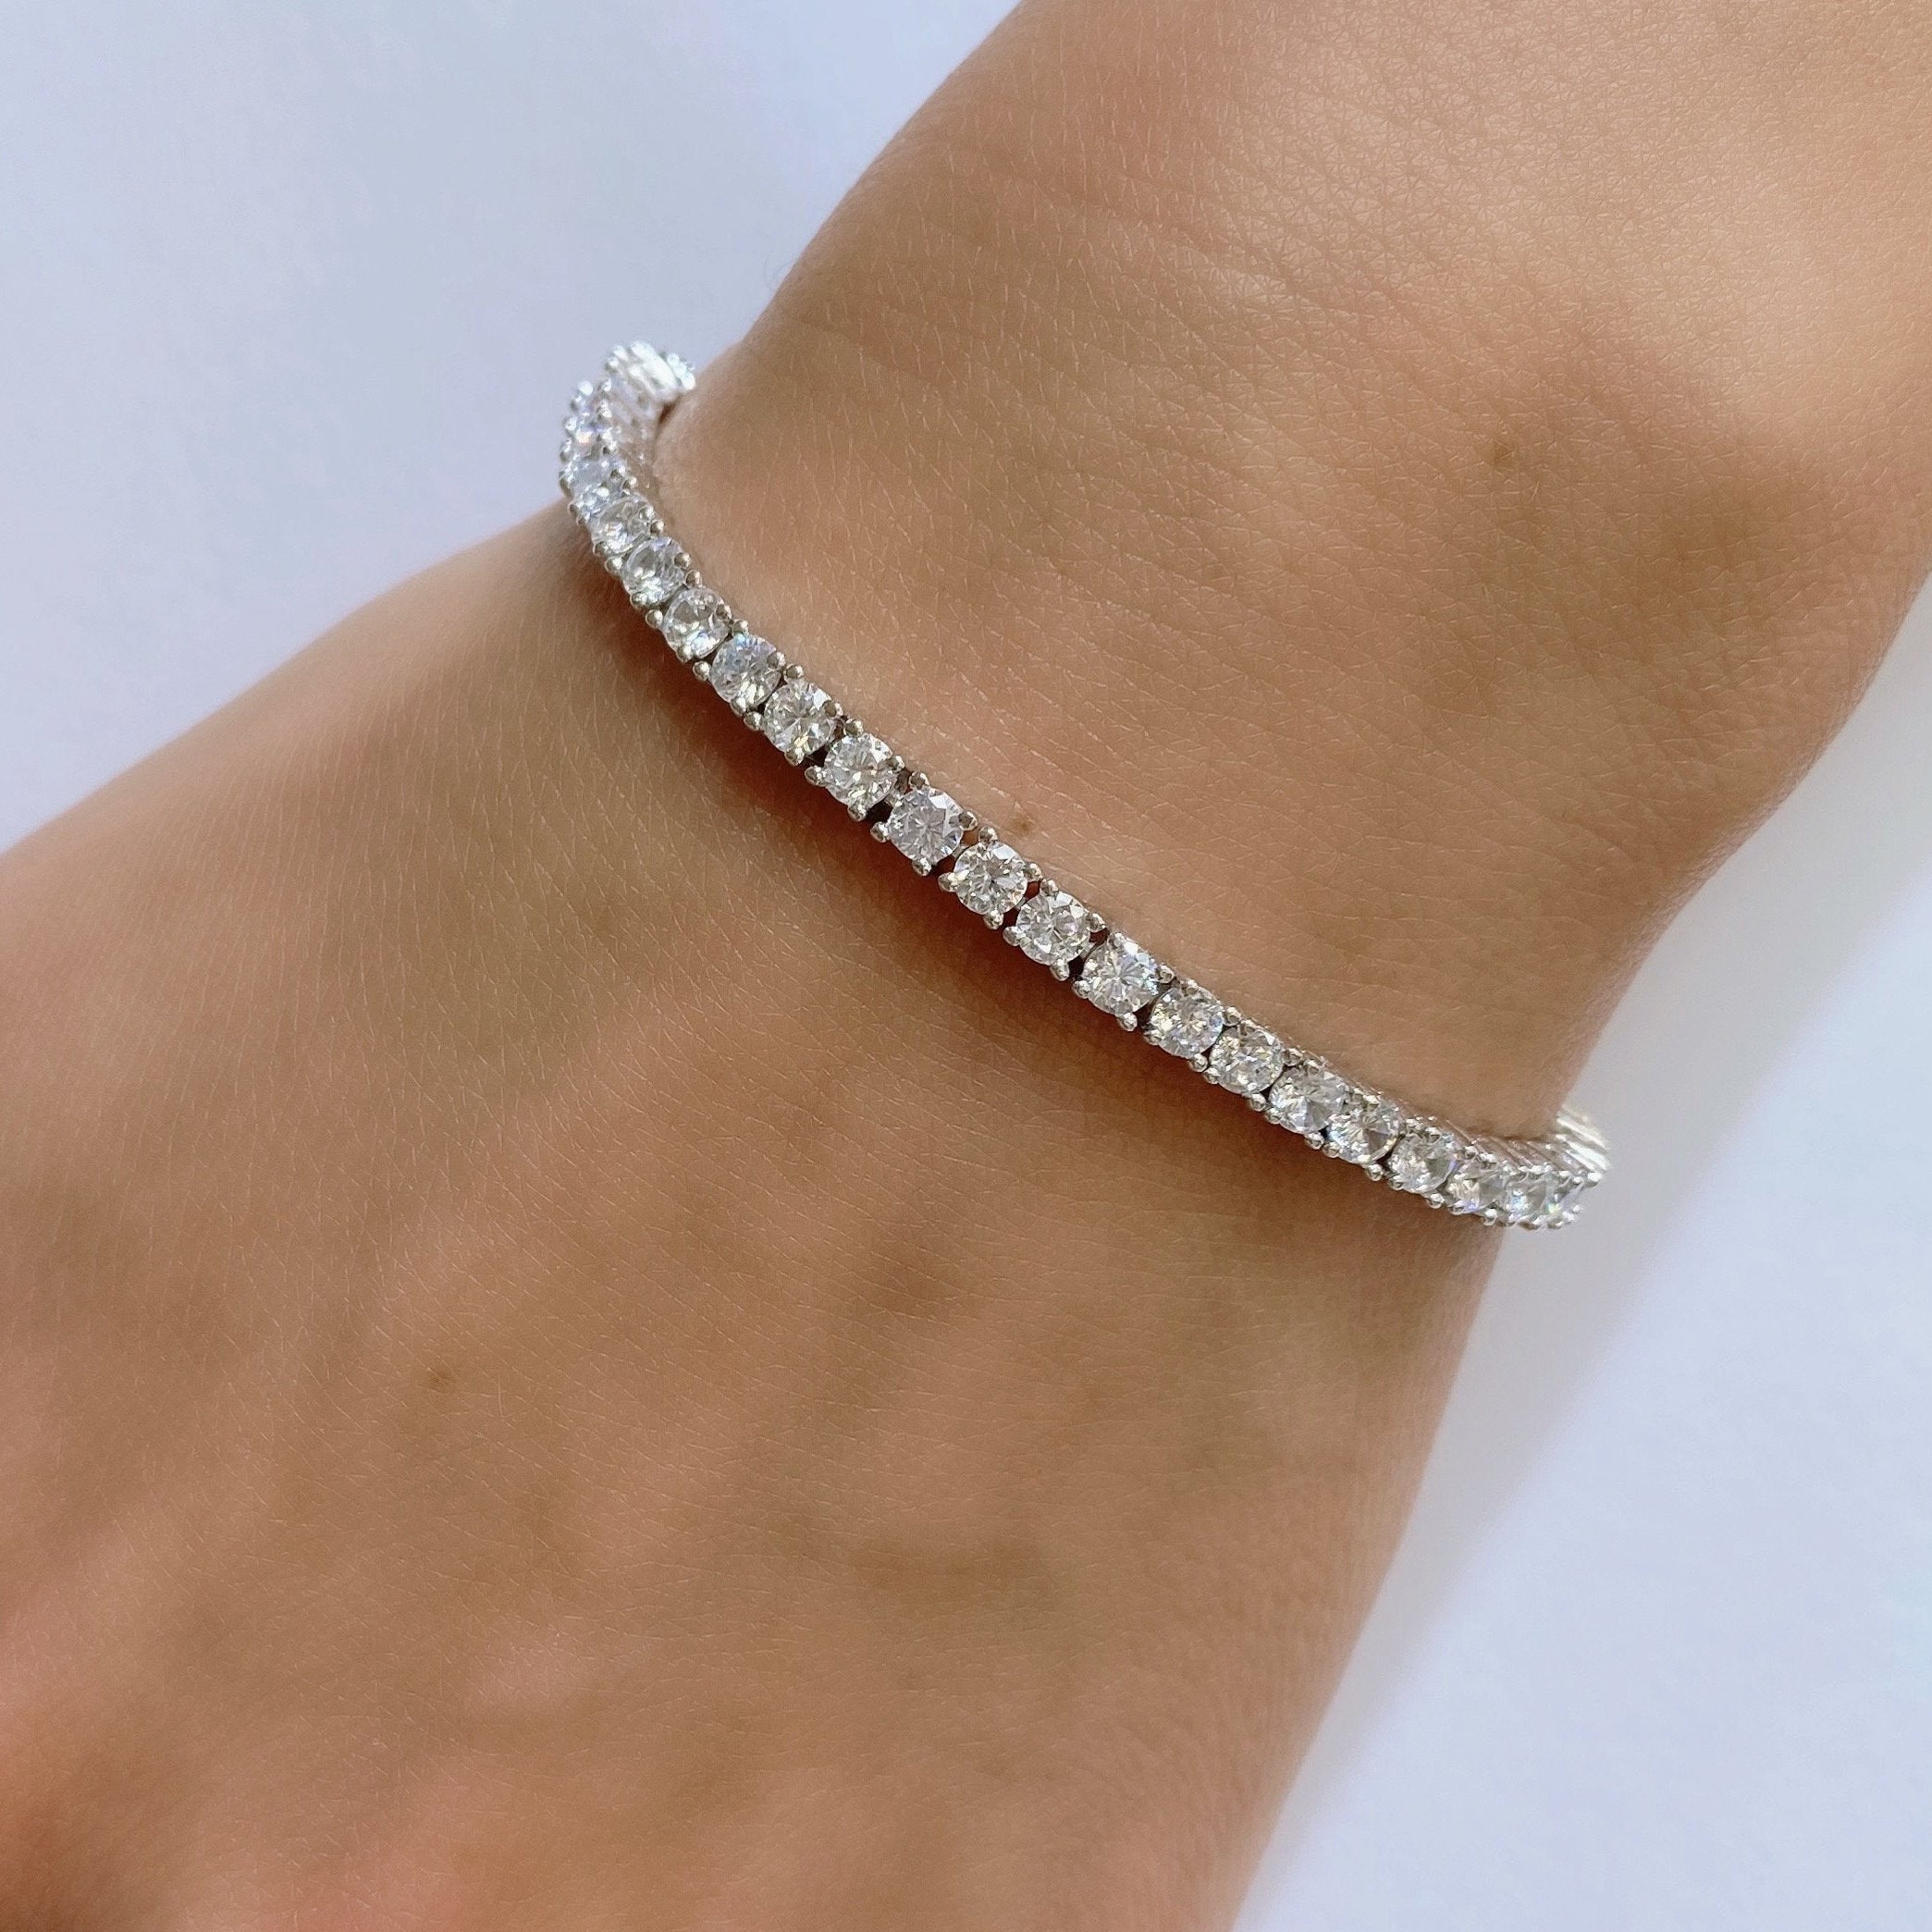 925 Sterling Silver Baguette Round Cubic Zirconia Cz Bracelet 7 Inch Fine Jewelry For Women Gifts For Her 